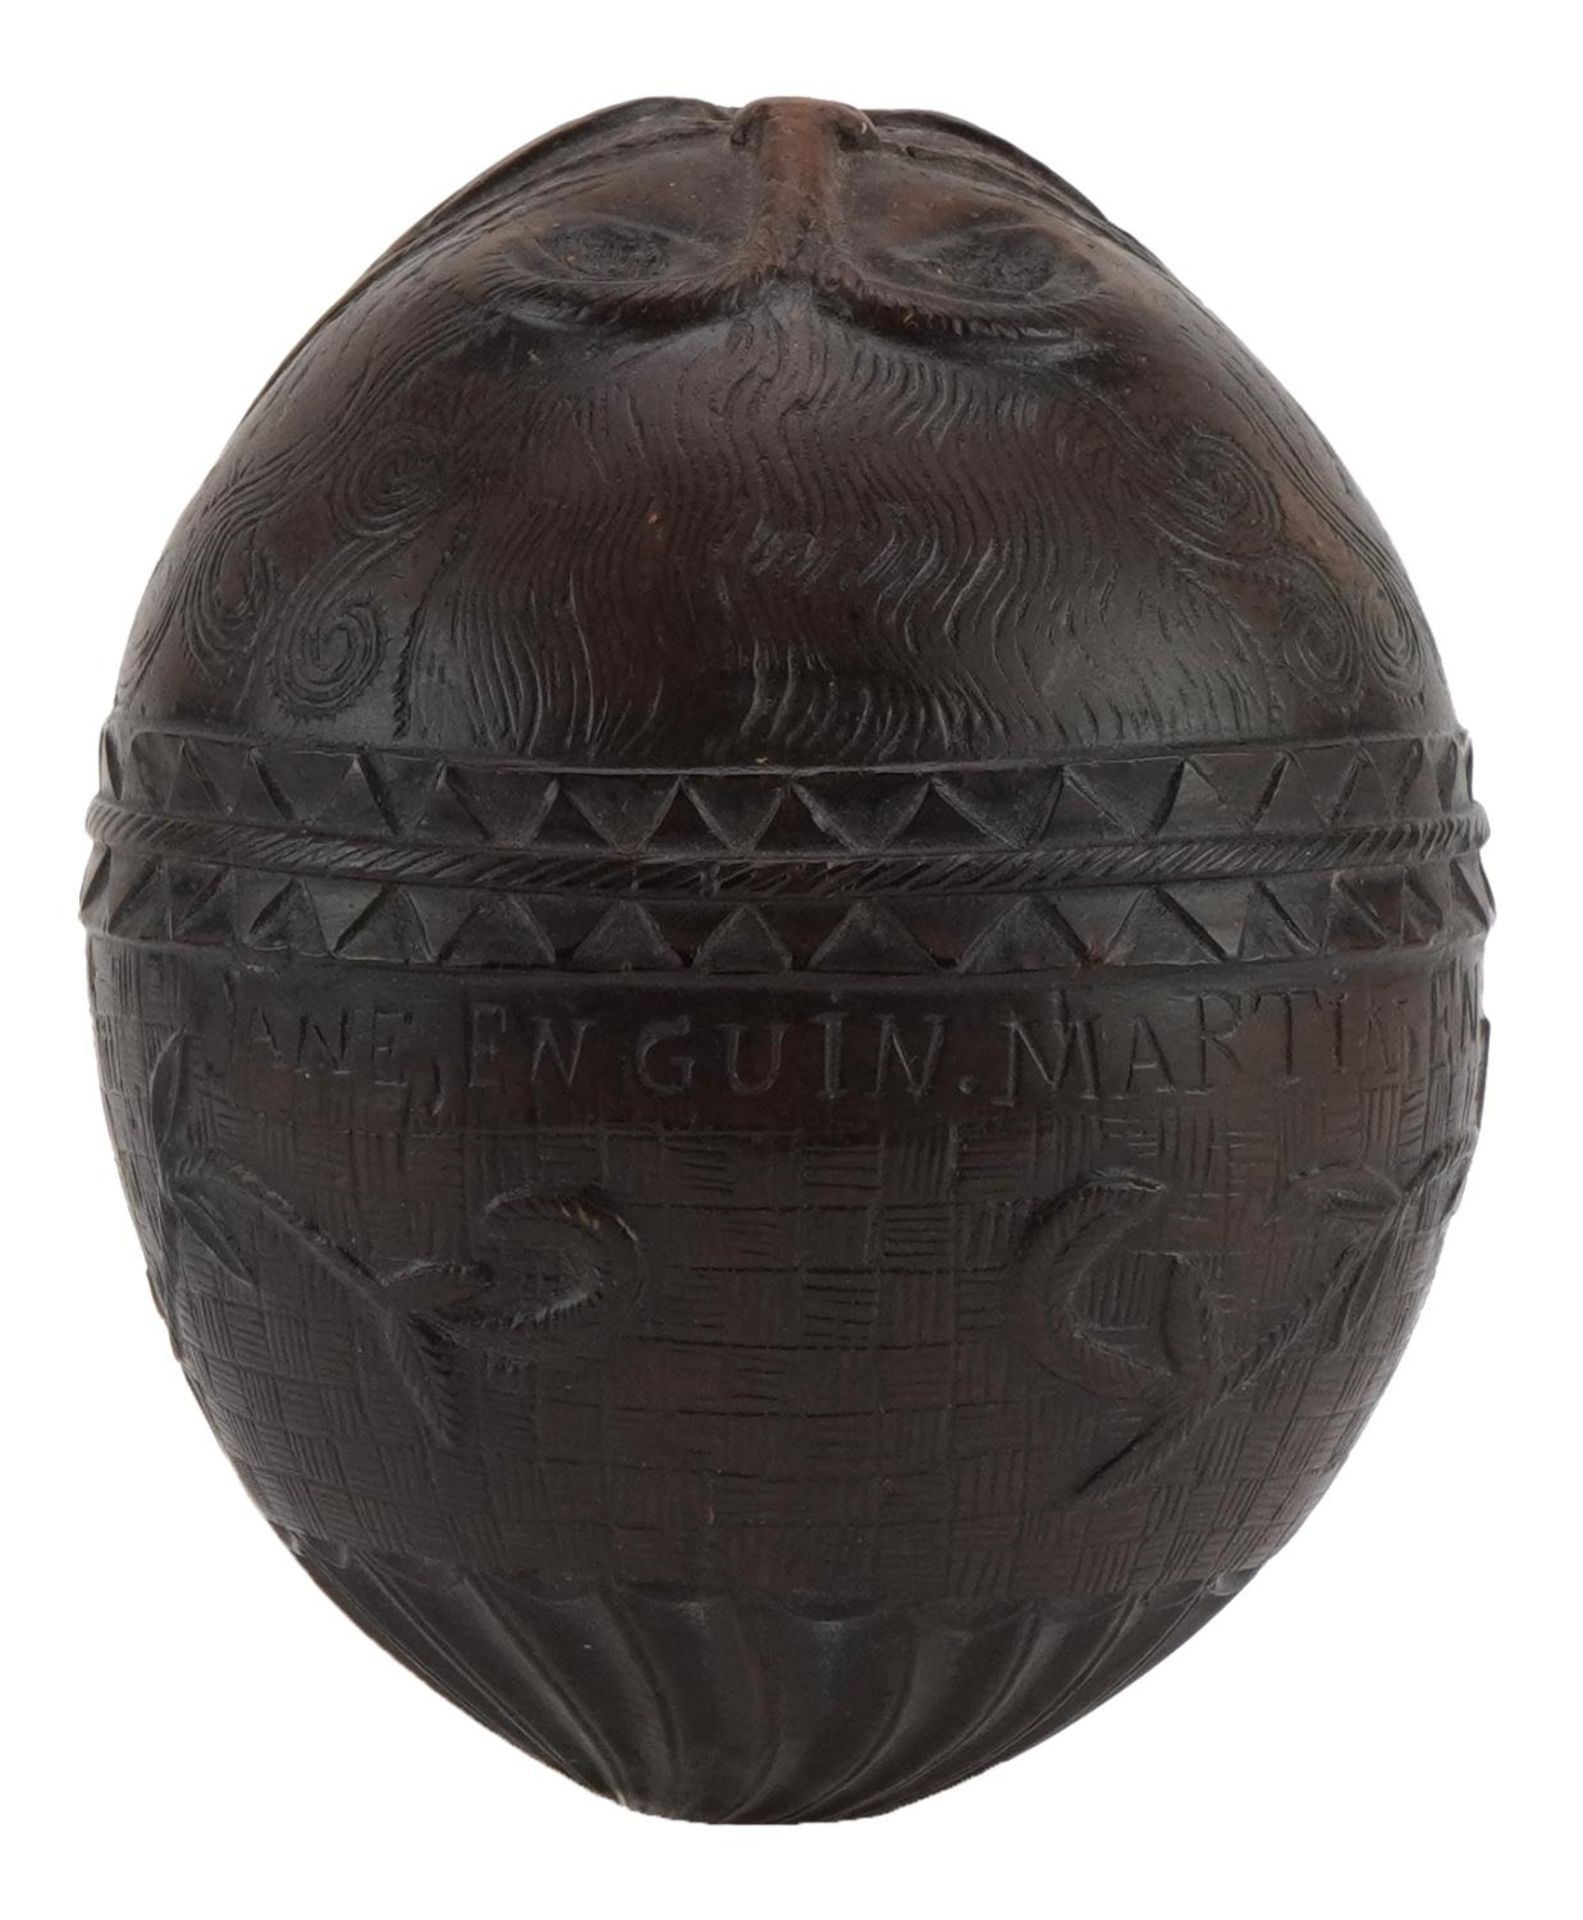 Antique coconut shell carved in the form of a bearded man inscribed Jane En Guin Martin EnGuin, 12. - Image 3 of 3